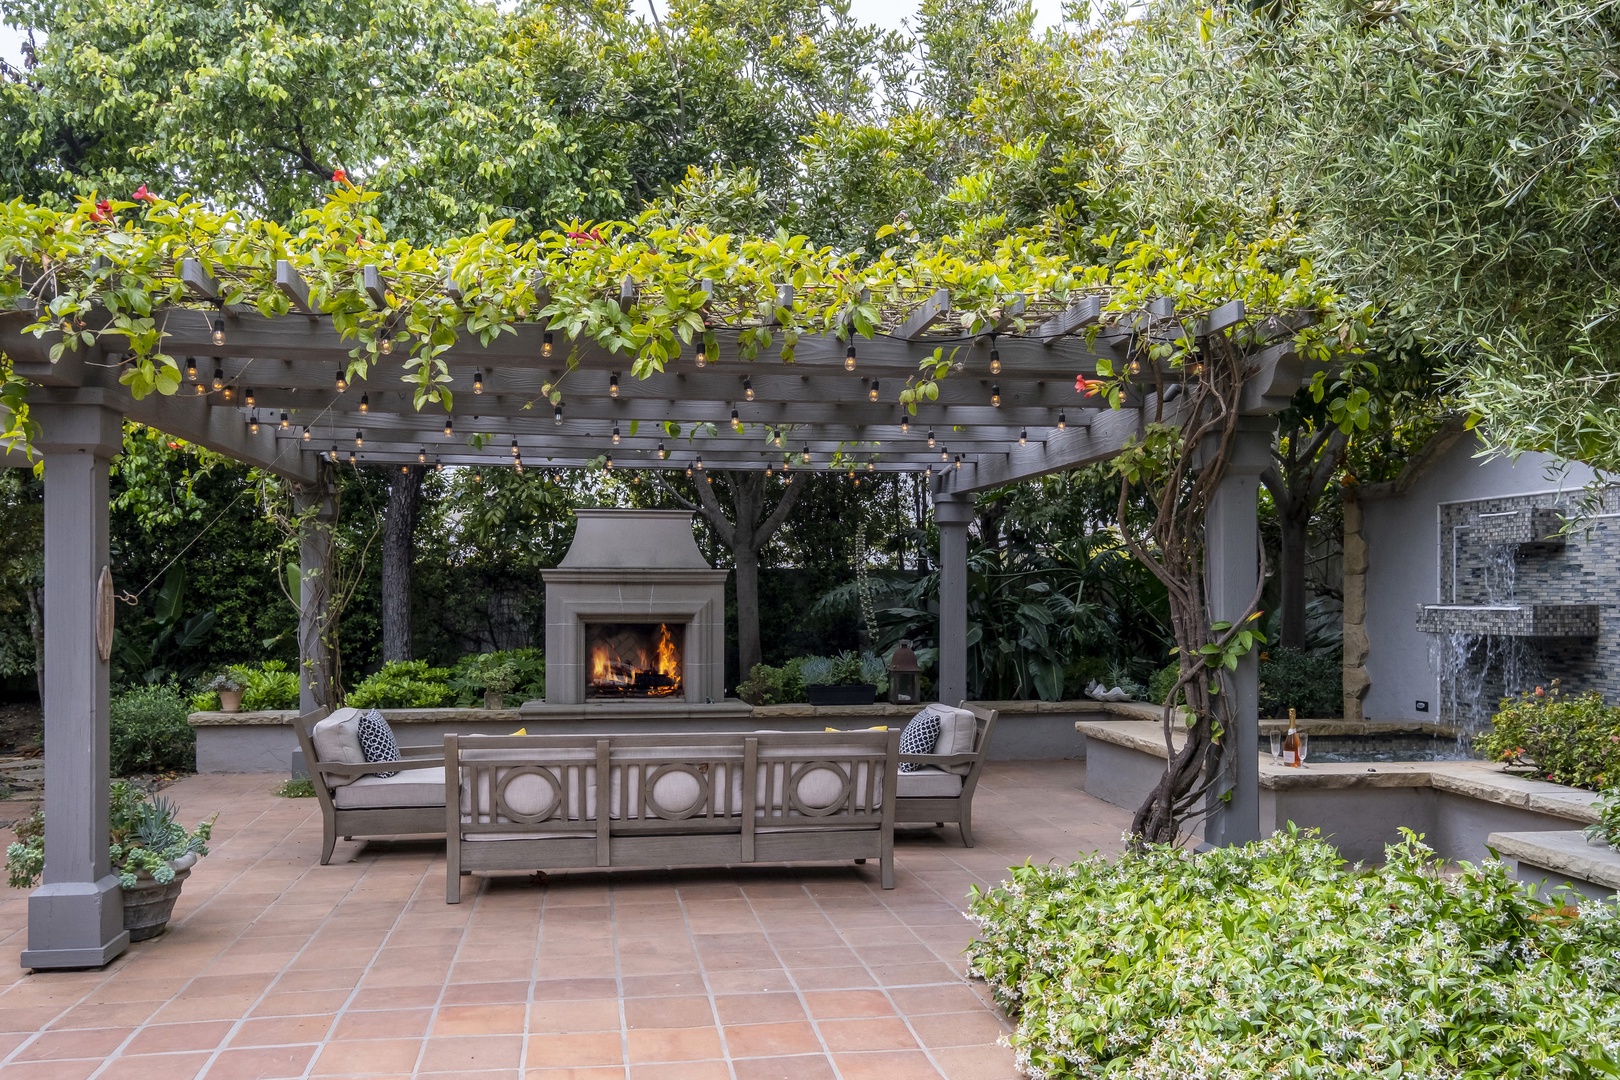 Beautiful backyard with firepit, conversational seating, and BBQ